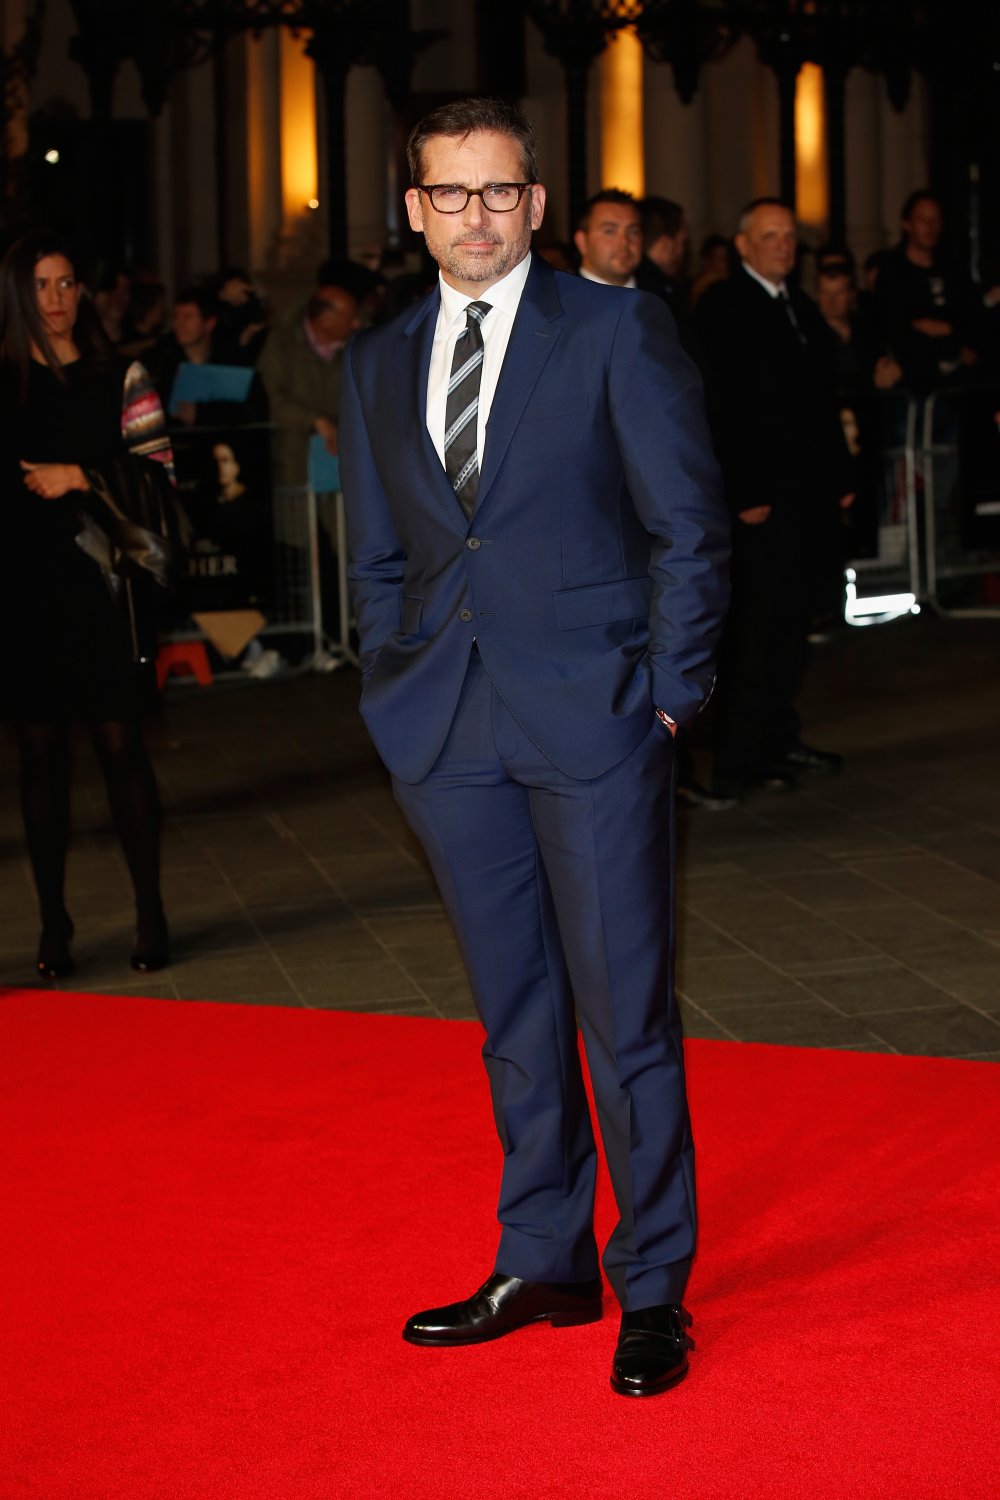 Steve Carell on the red carpet for Foxcatcher during the 58th BFI London Film Festival